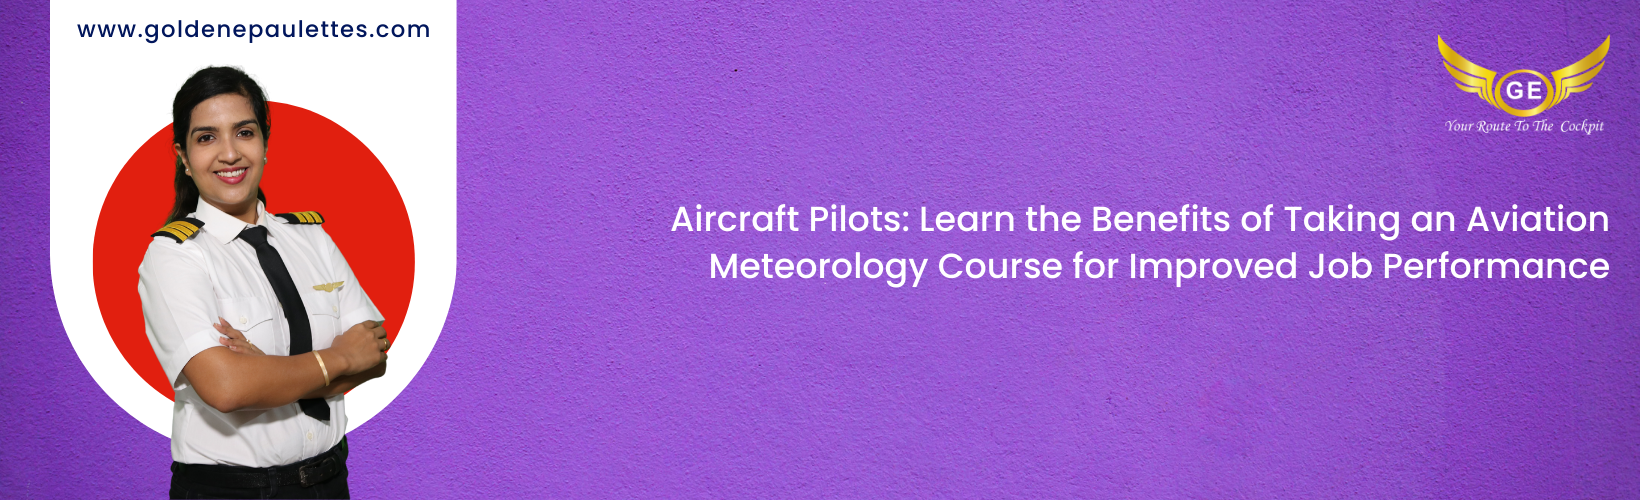 Aviation Meteorology Course and Pilot Career